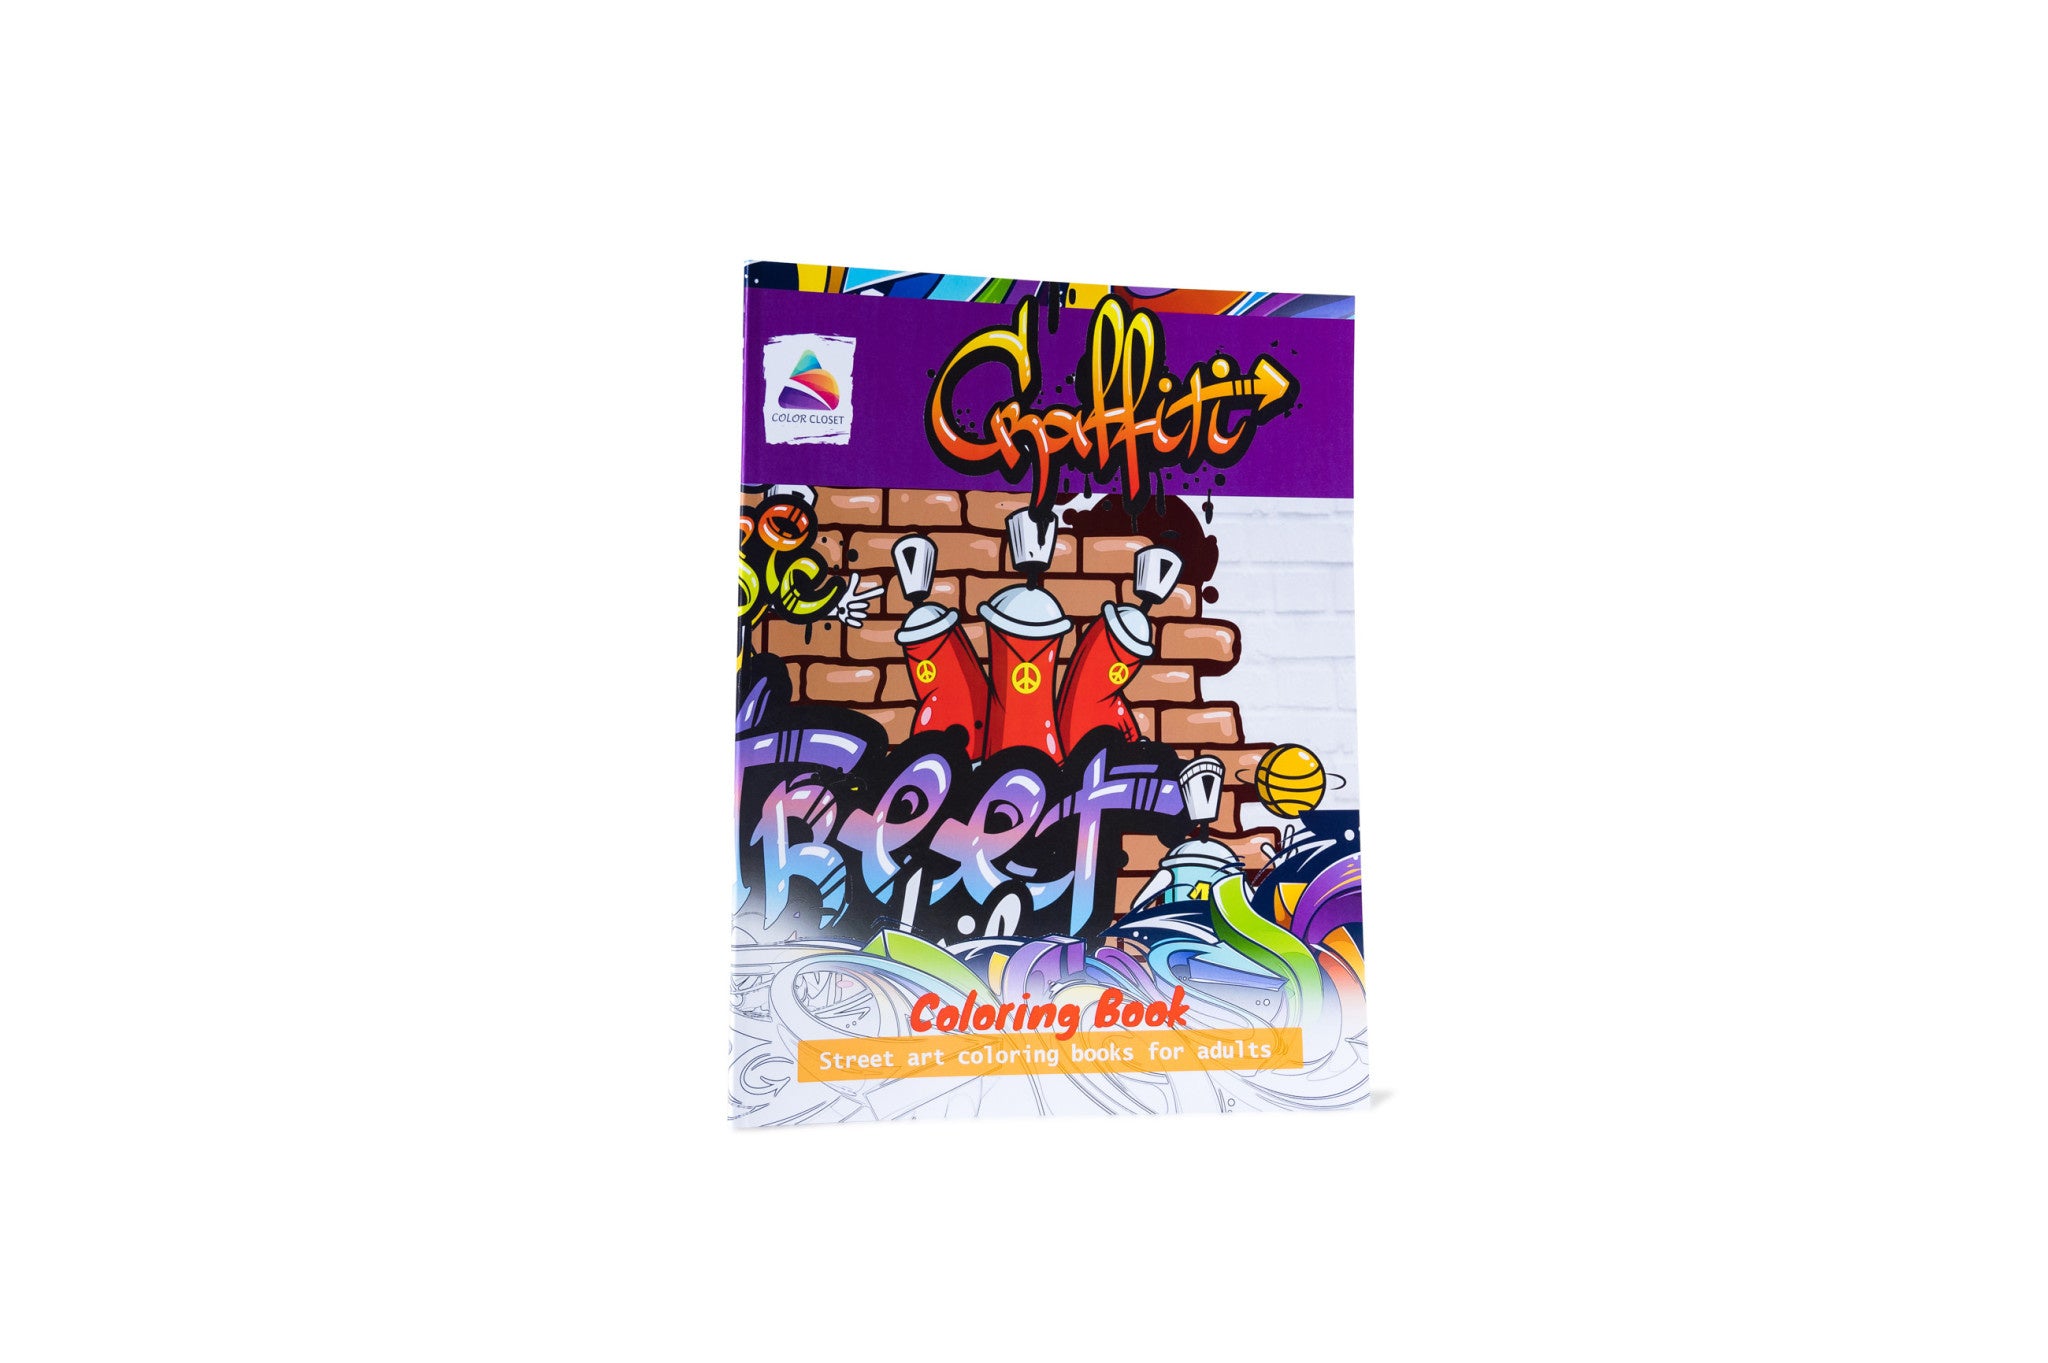 Graffiti Coloring Book: Street Art Coloring Books for Adults - Wynwood Walls Shop